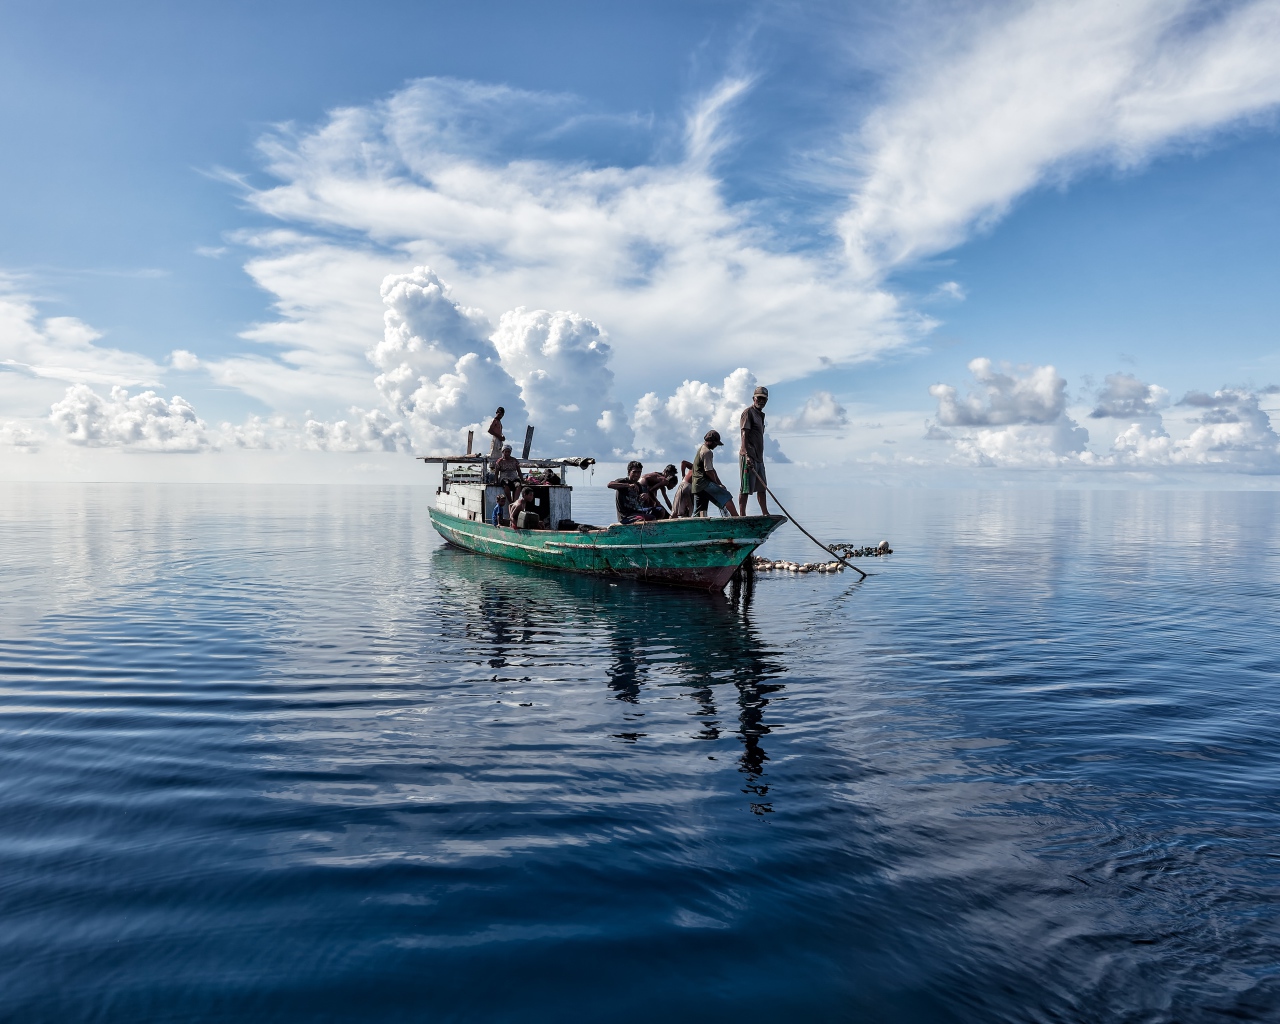 Boat with fishermen at sea with white clouds